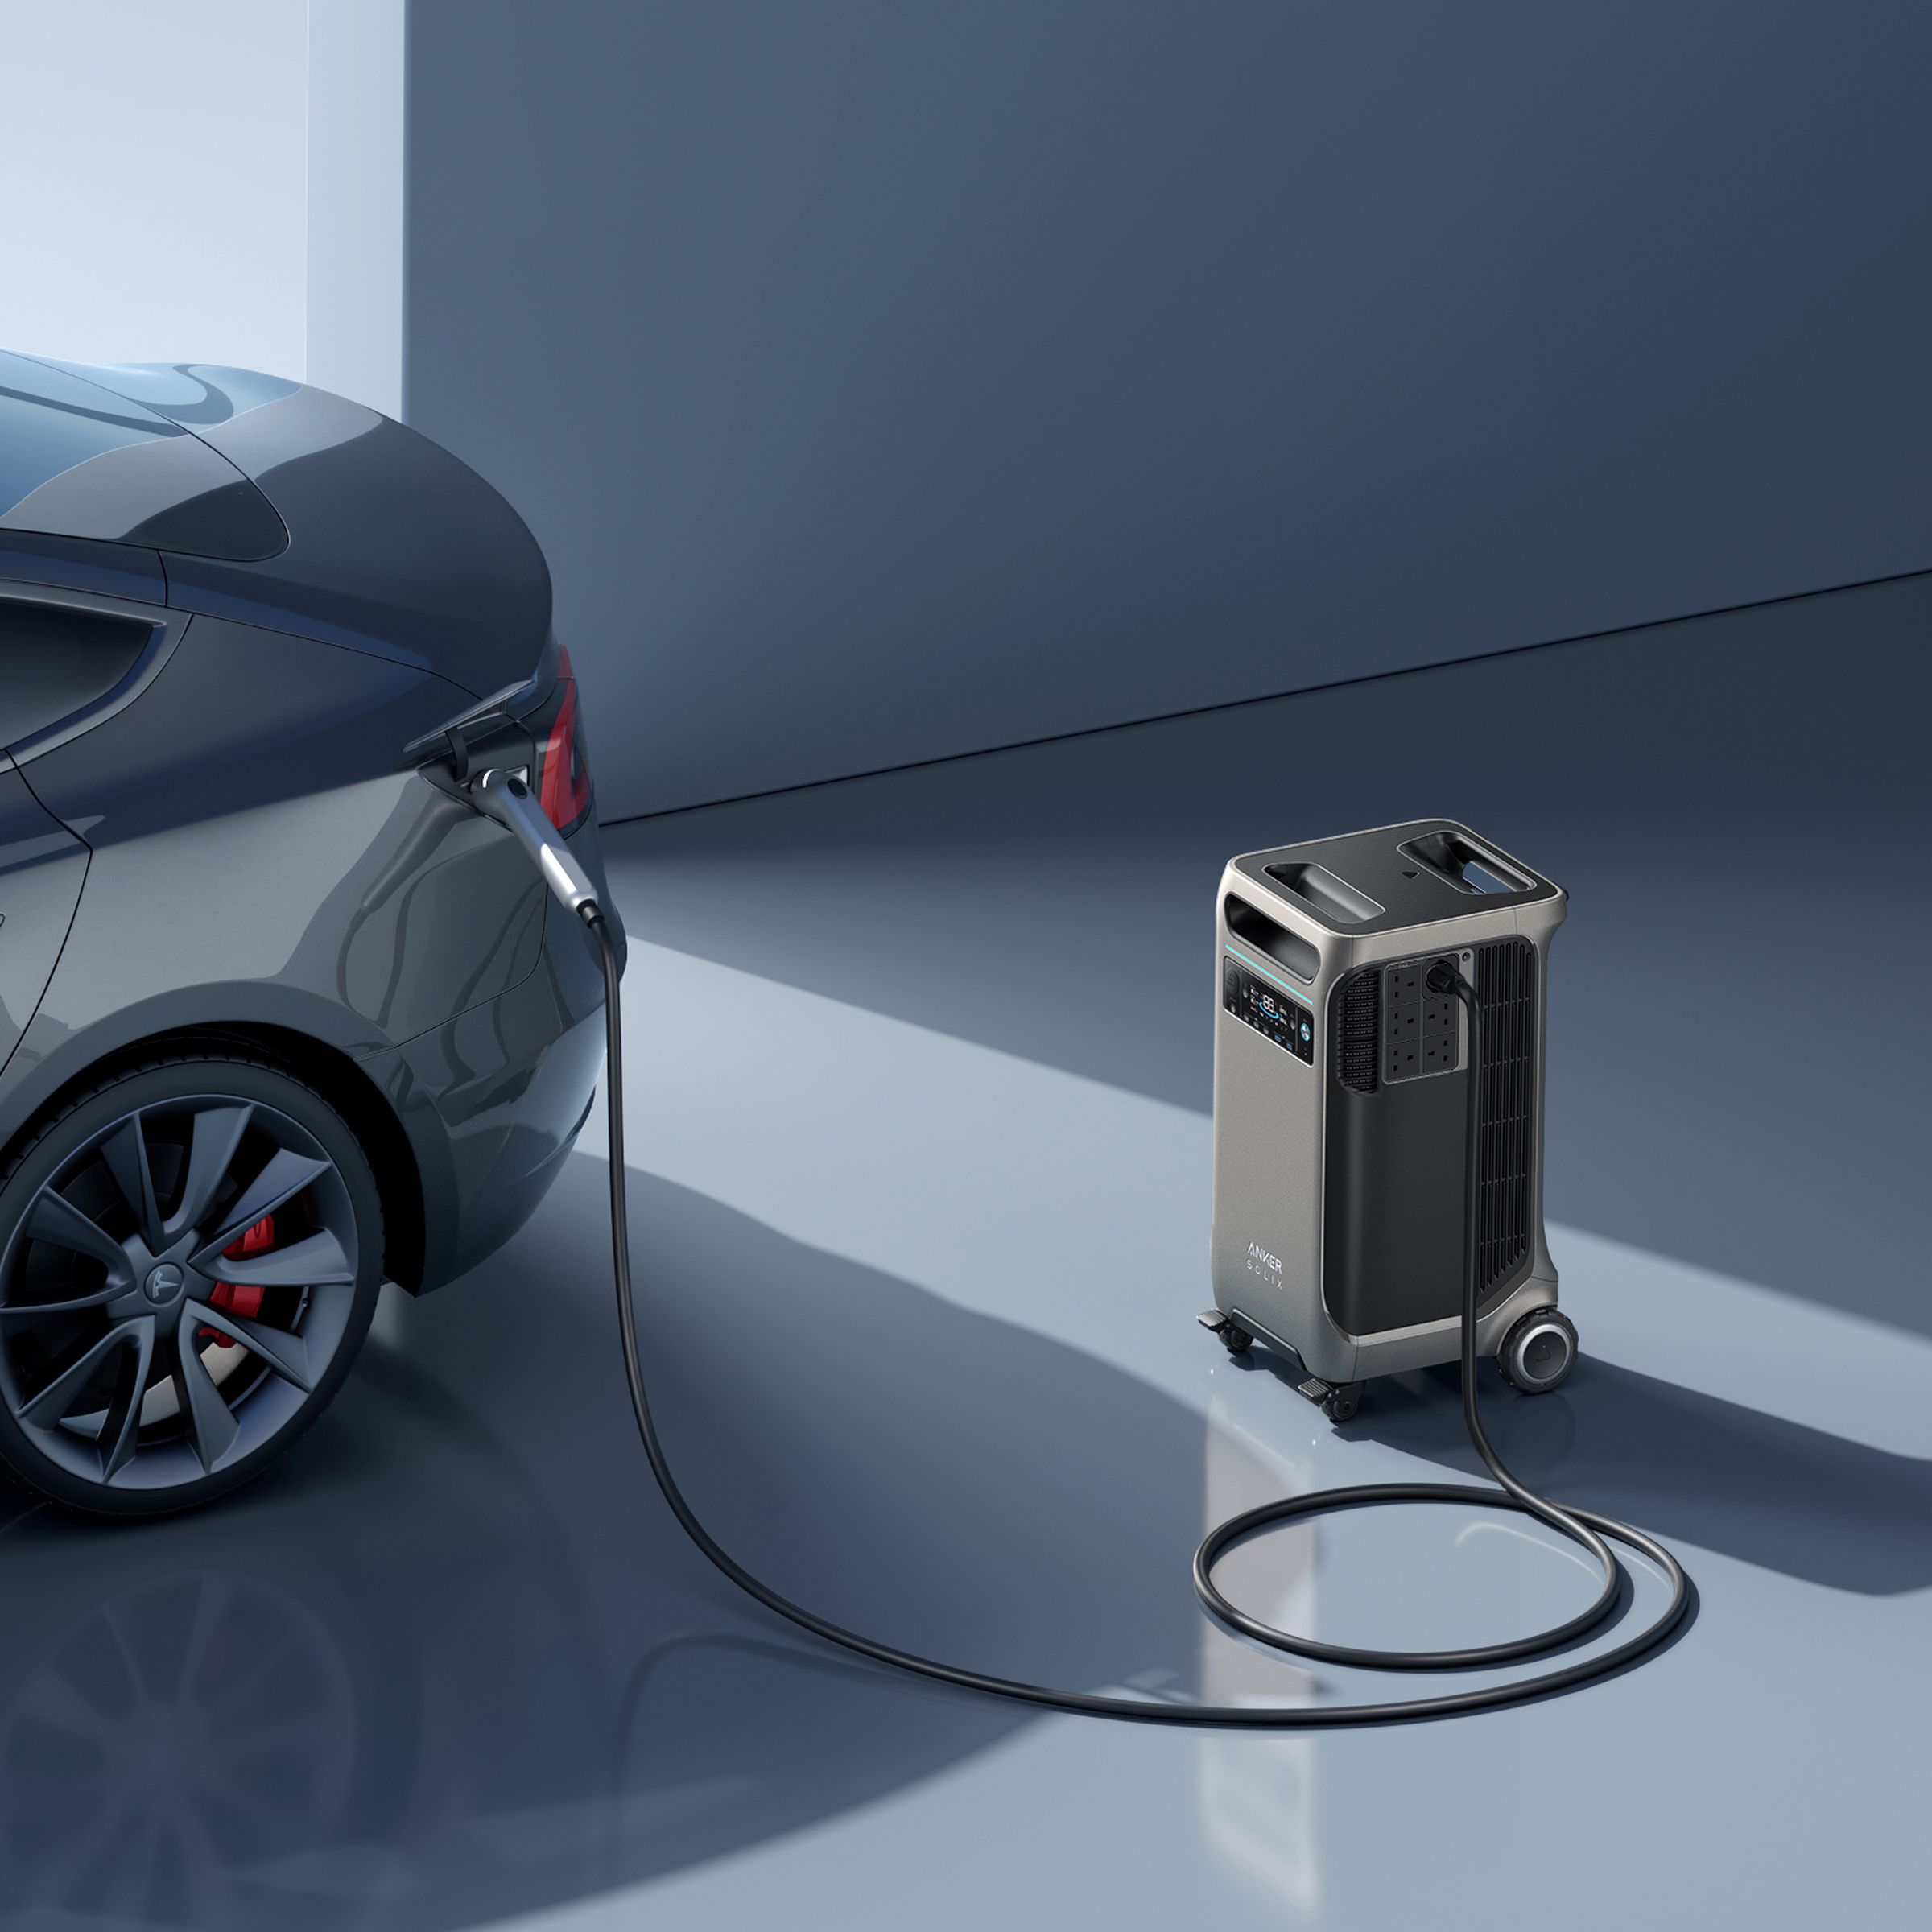 Charge your EV at 6,000W/240V for a dozen or so extra miles of range in an emergency — or more with expansion packs.